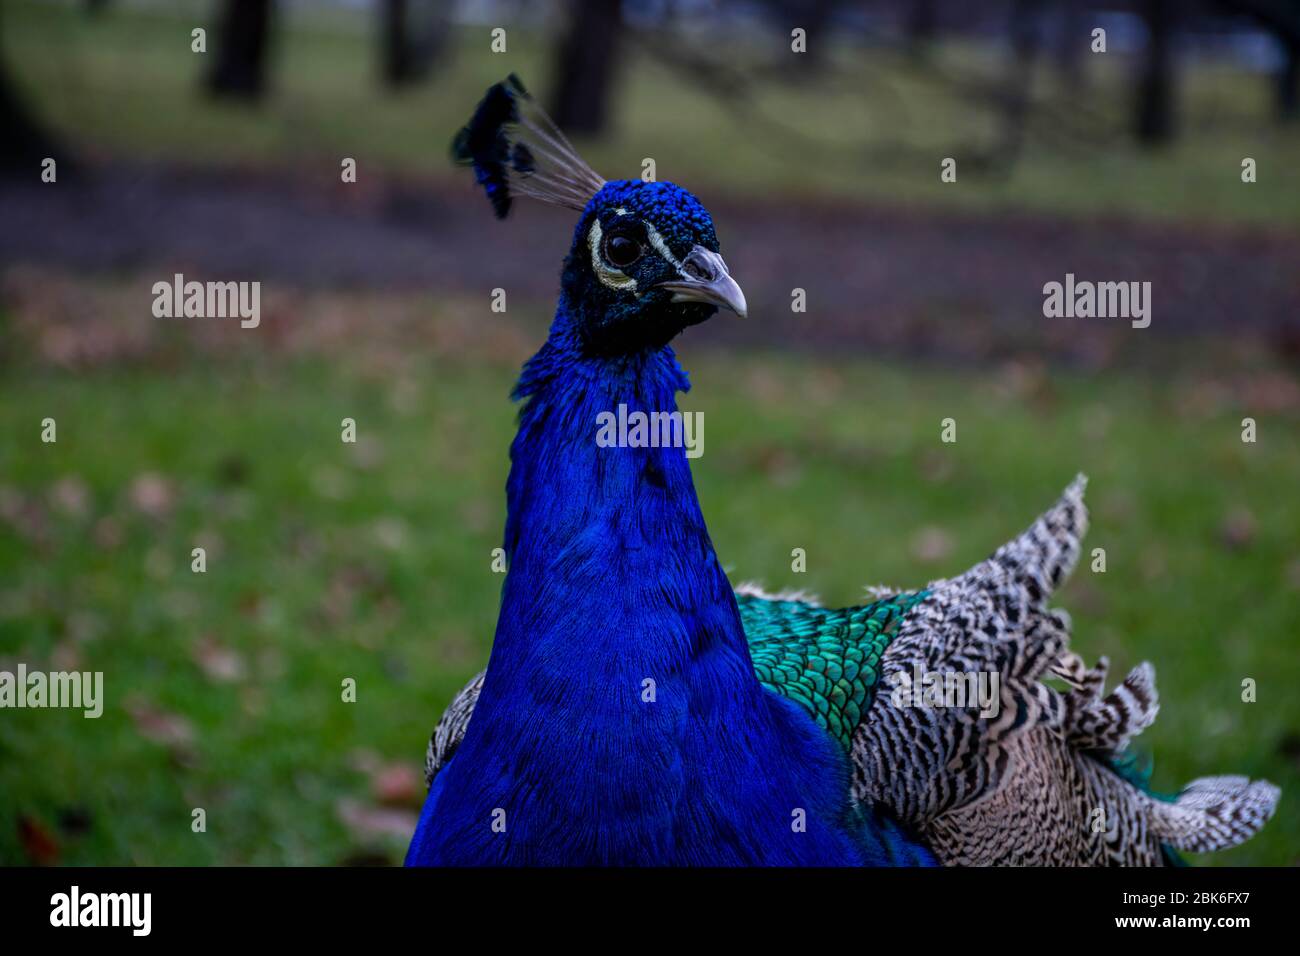 Portrait of peafowl (peacock) in park Stock Photo